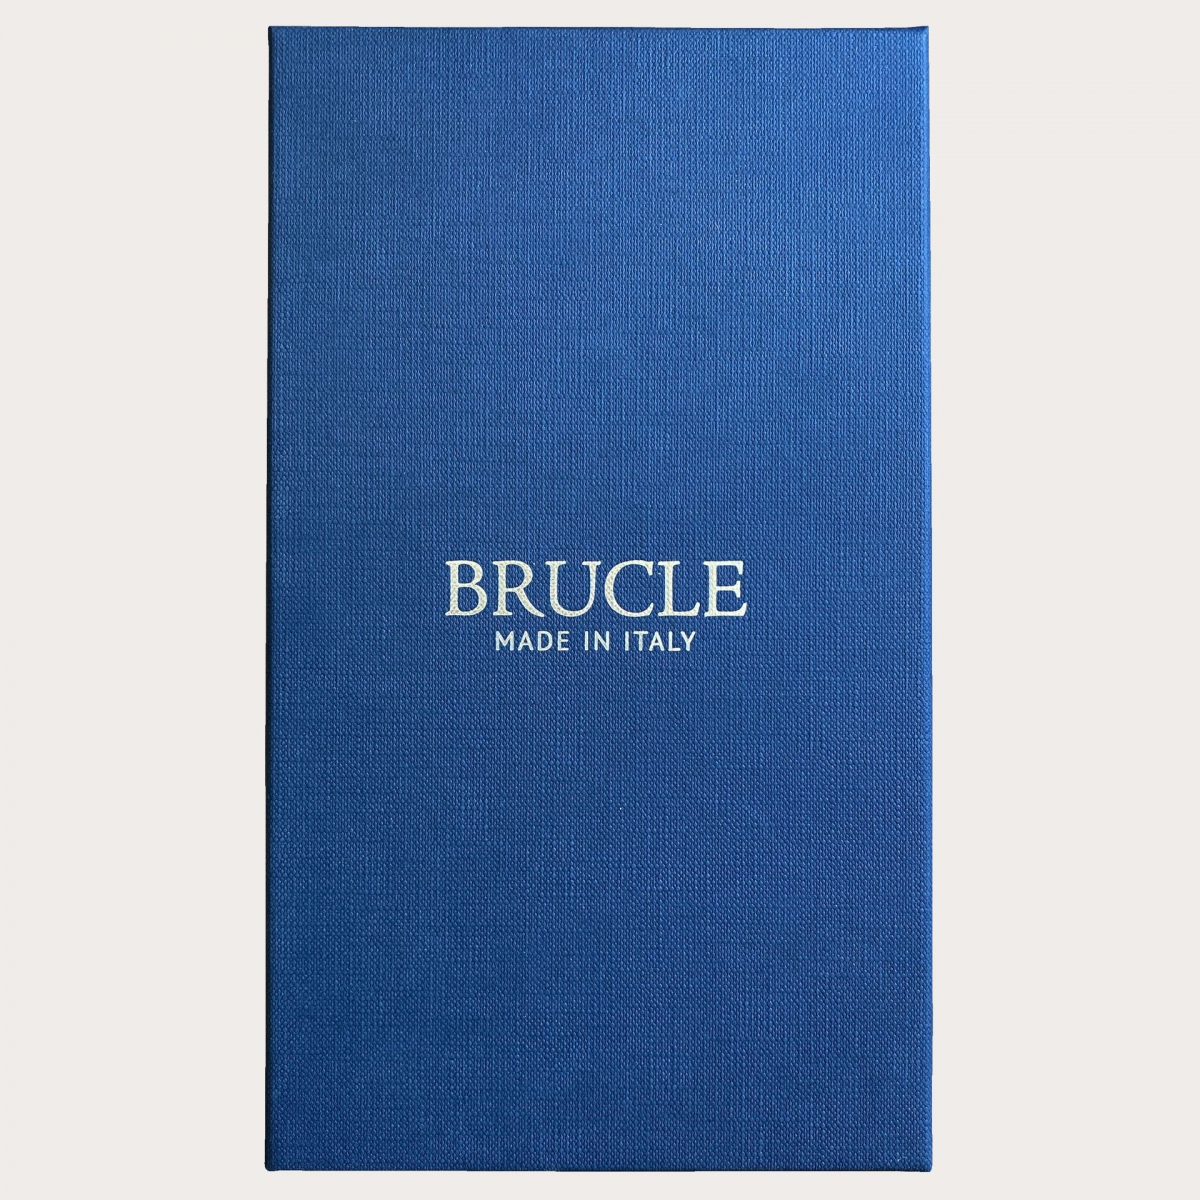 BRUCLE X-shaped suspenders with striped pattern, blue and yellow